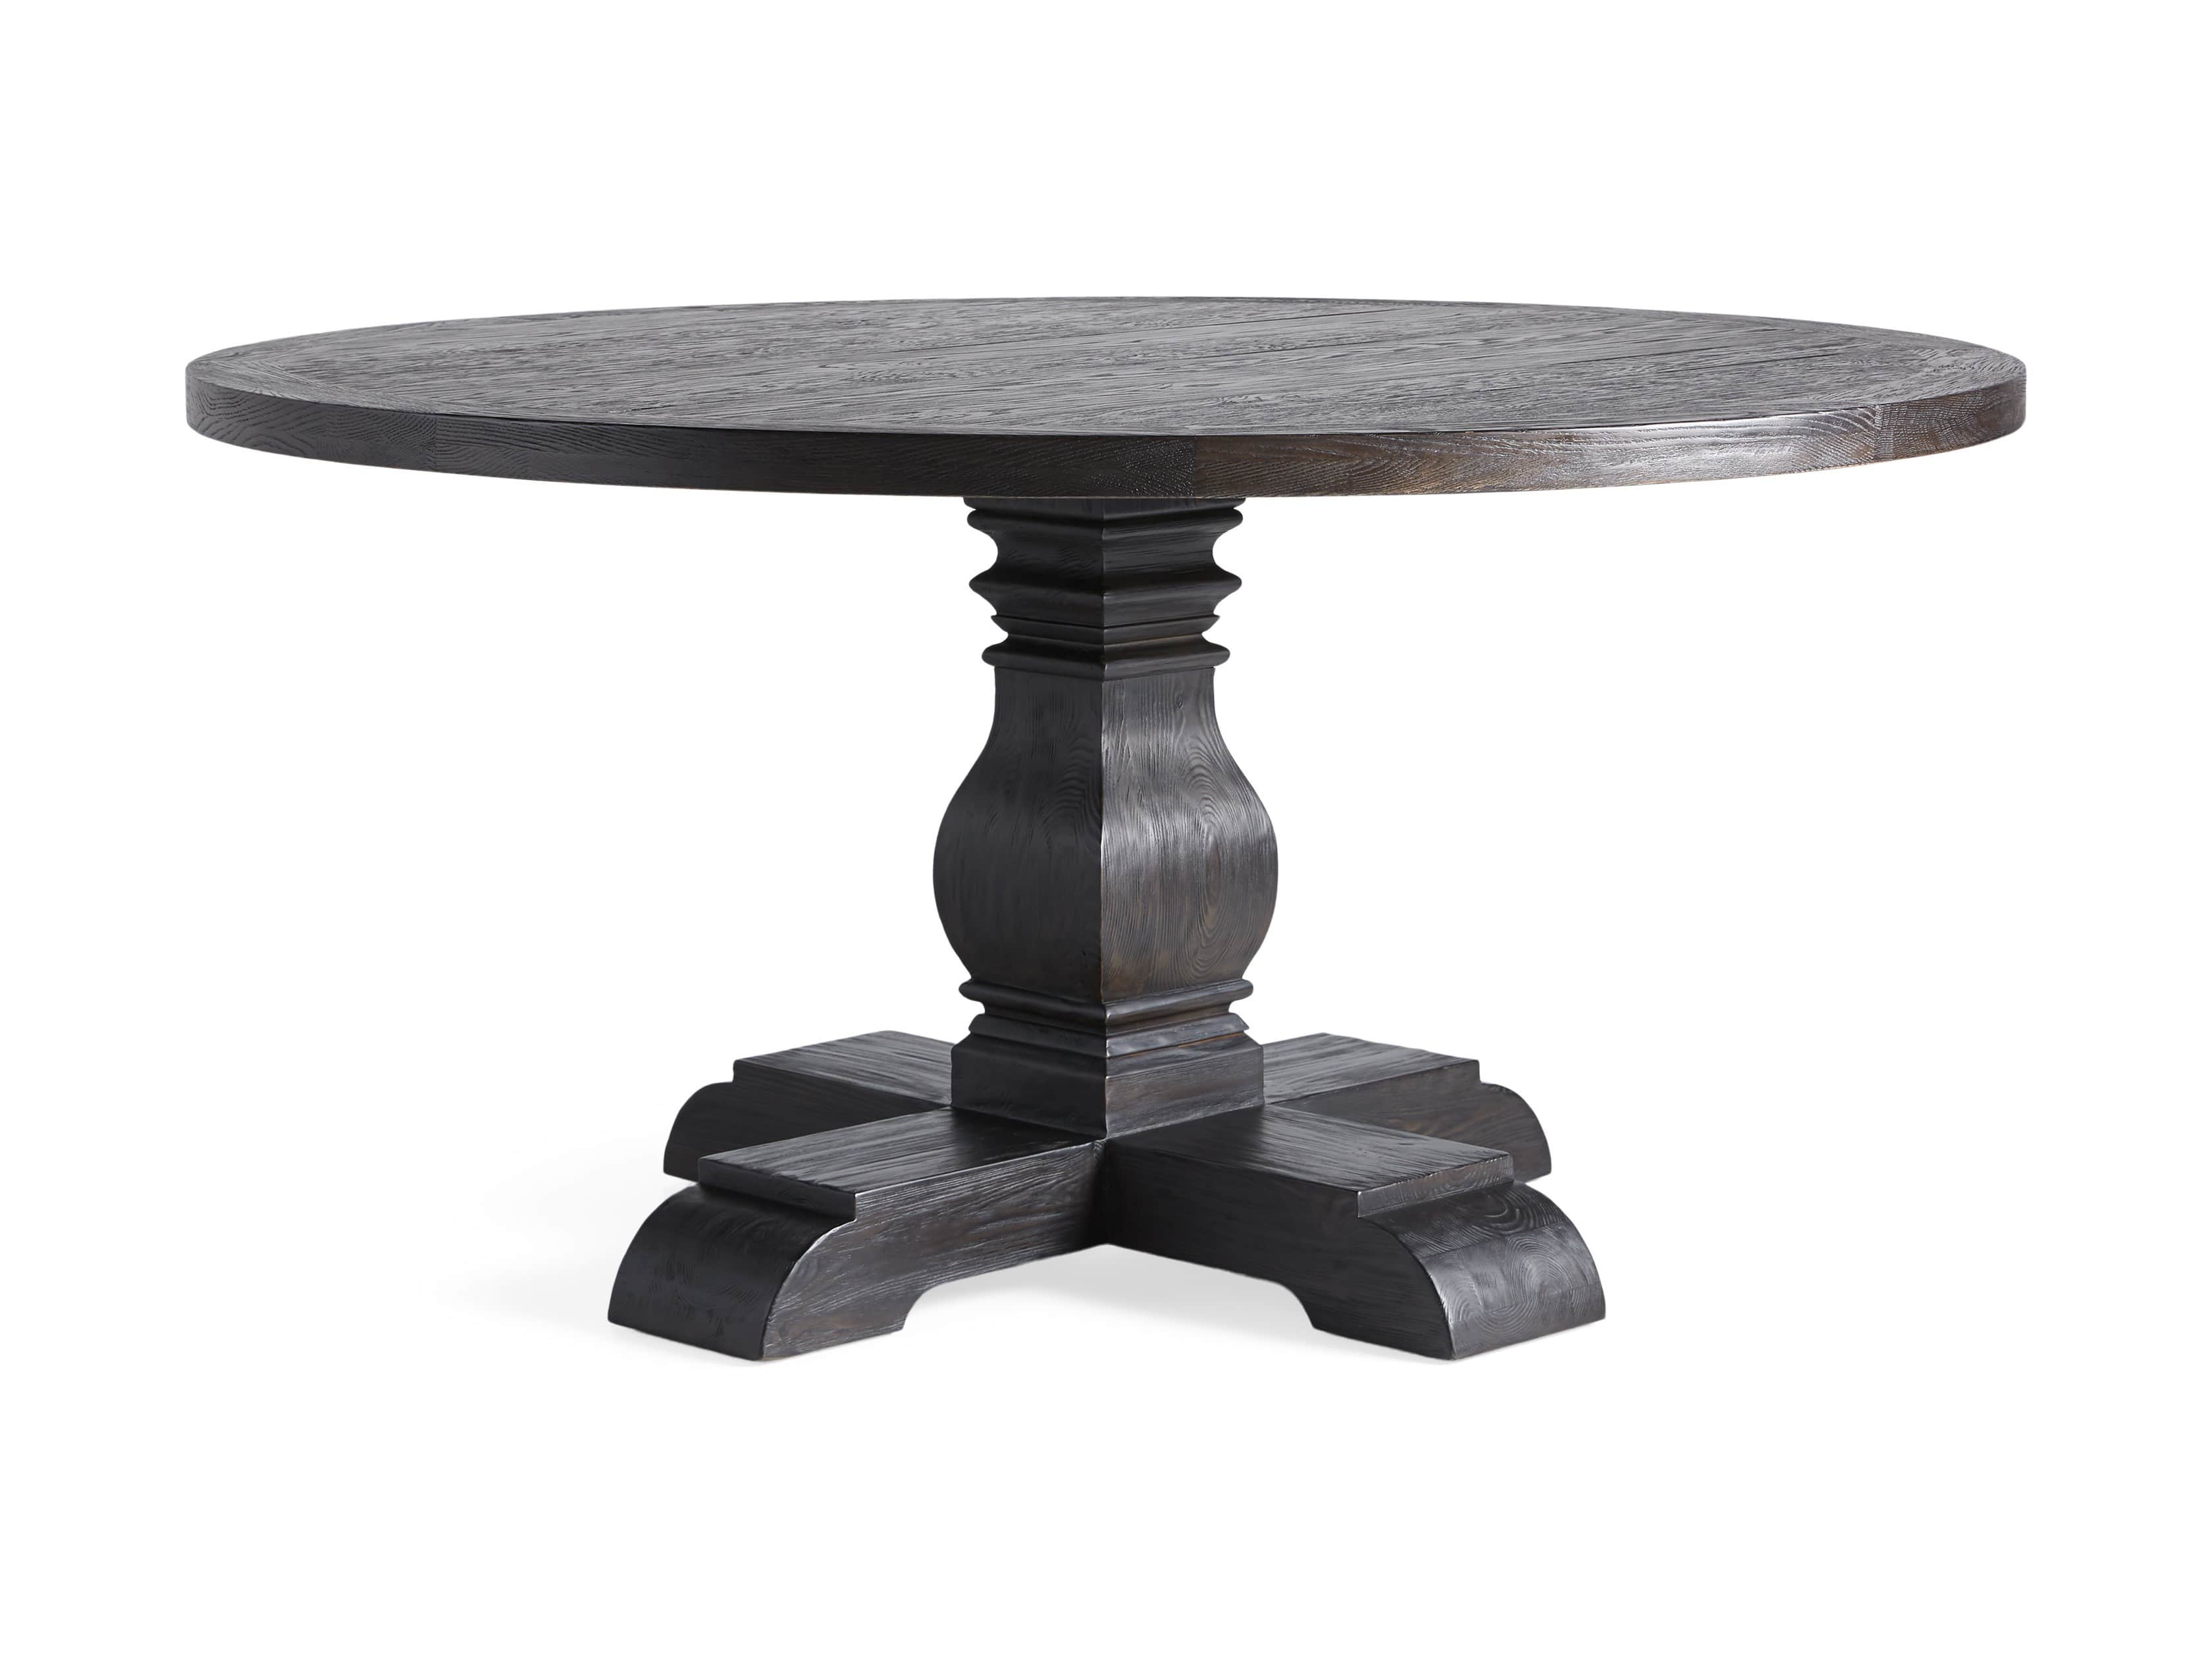 Kensington Round Dining Table Arhaus, What Size Rug For 60 Inch Round Dining Table